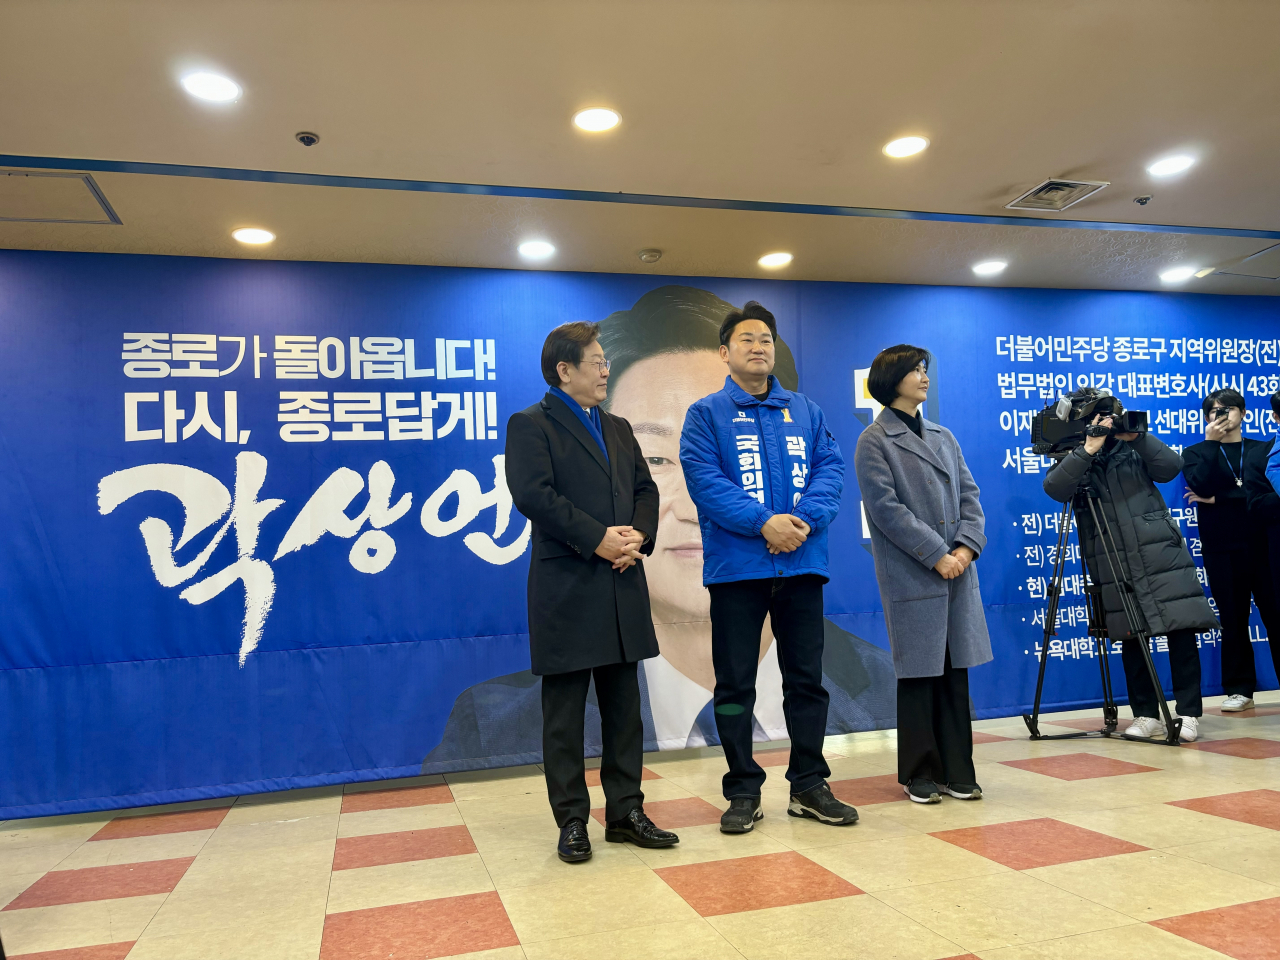 Democratic Party of Korea chair Rep. Lee Jae-myung (left) visits the office of Kwak Sang-eon, the son-in-law of the late President Roh Moo-hyun, (center) on Monday afternoon. (Yonhap)